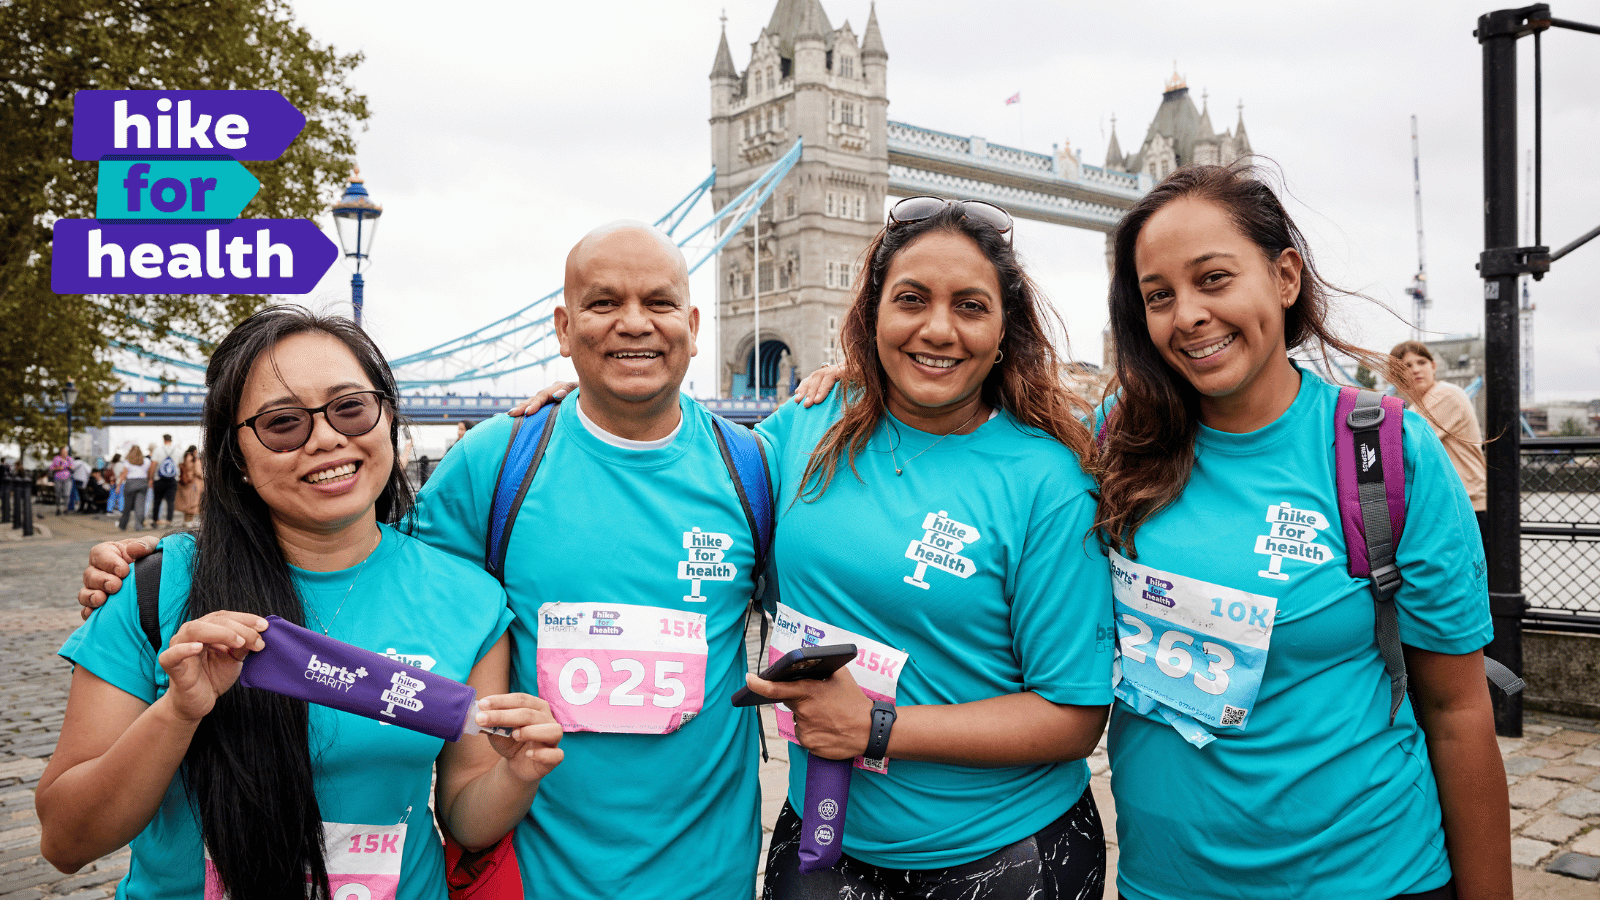 A group of people standing in front of London bridge dressed in Hike for Health T-shirts